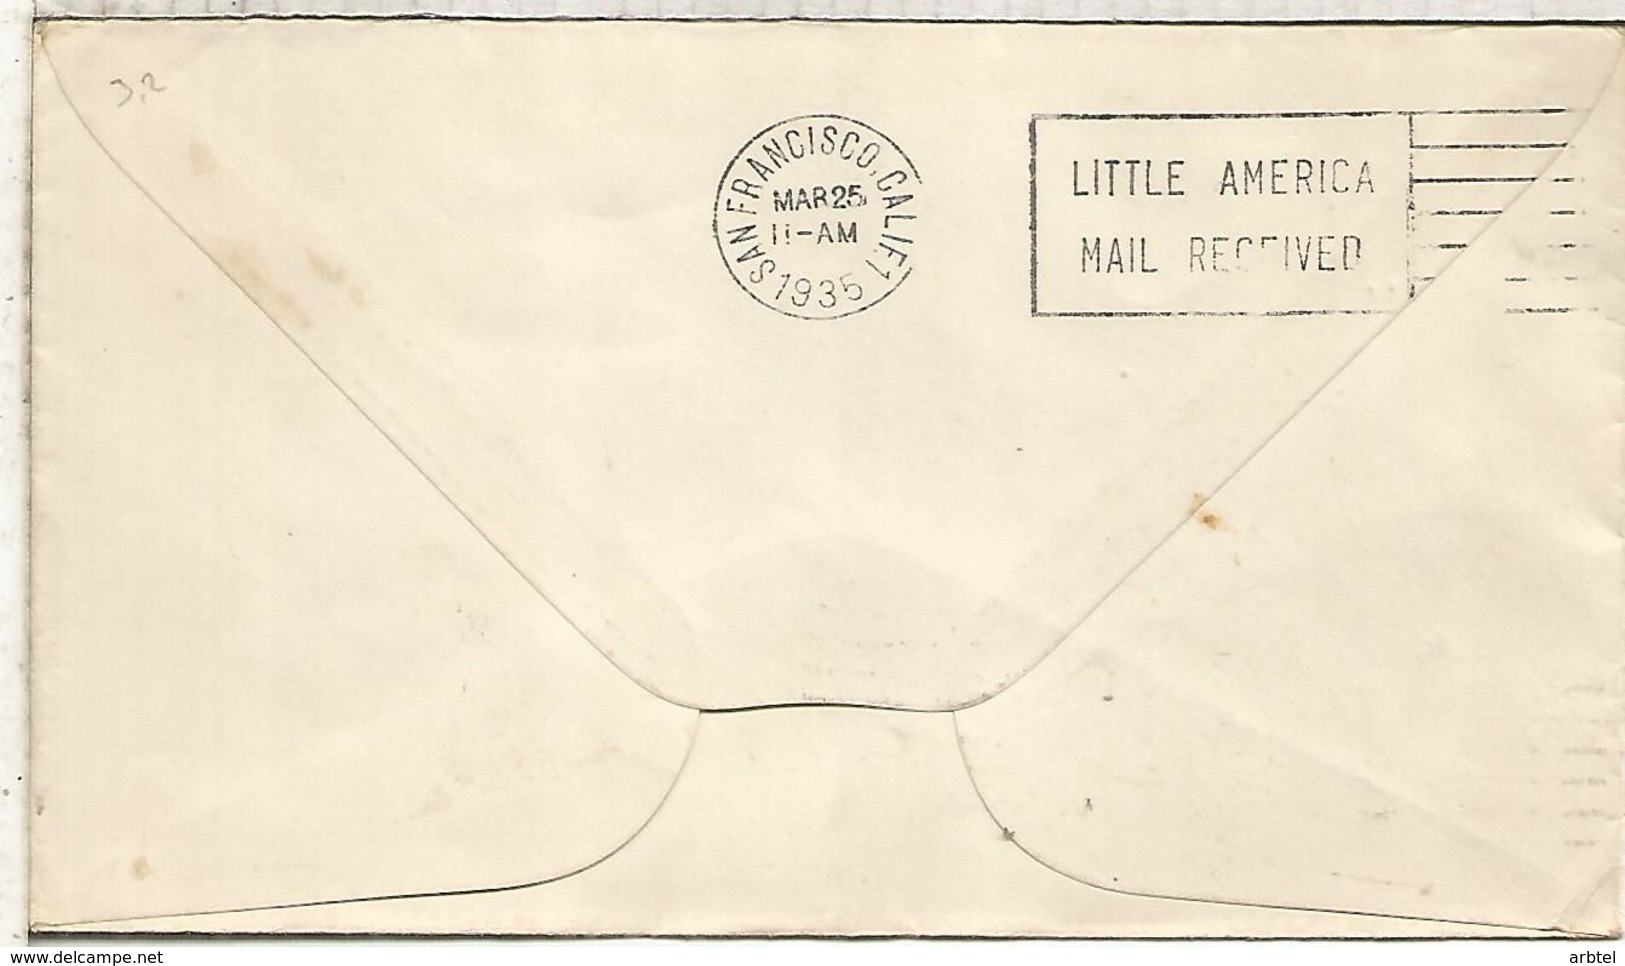 USA 1934 BYRD ANTARCTIC EXPEDITION LITTLE AMERICA POSTMAR WITH VERY RARE DATE 30 JAN 1934 INSTEAD USUAL 31 JAN - Antarctische Expedities